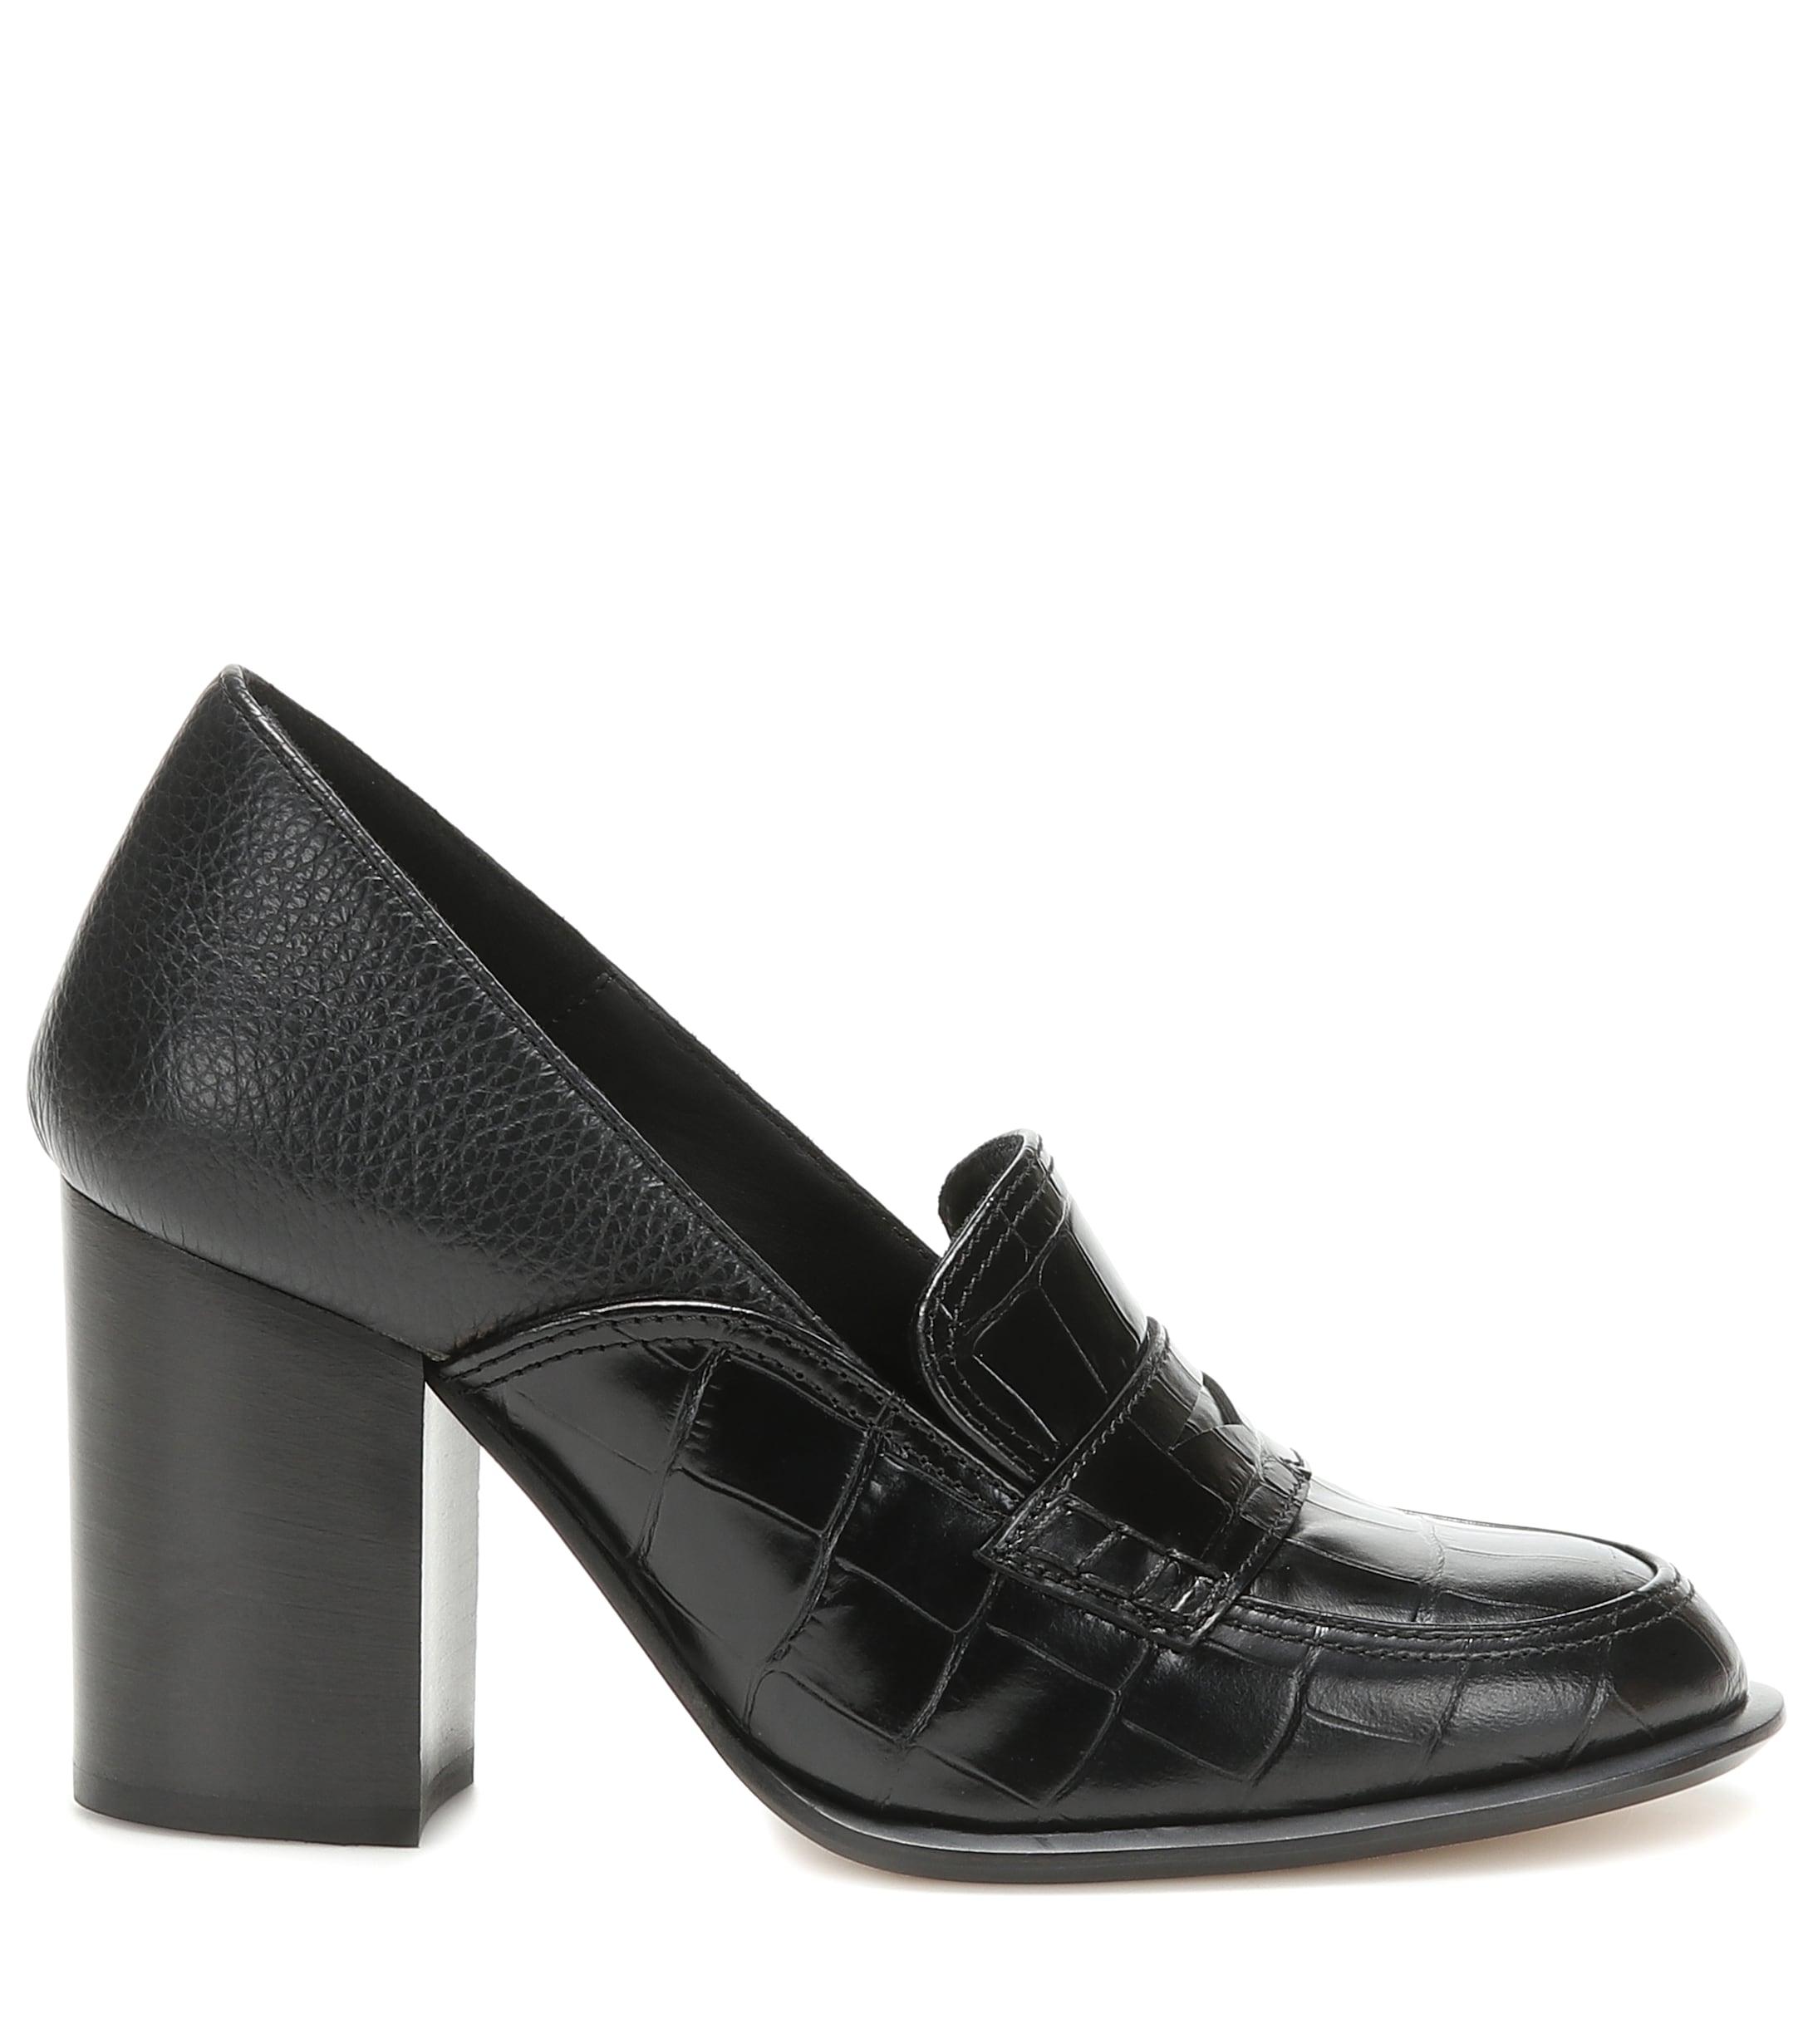 Loewe Leather Loafer Pumps in Black - Lyst